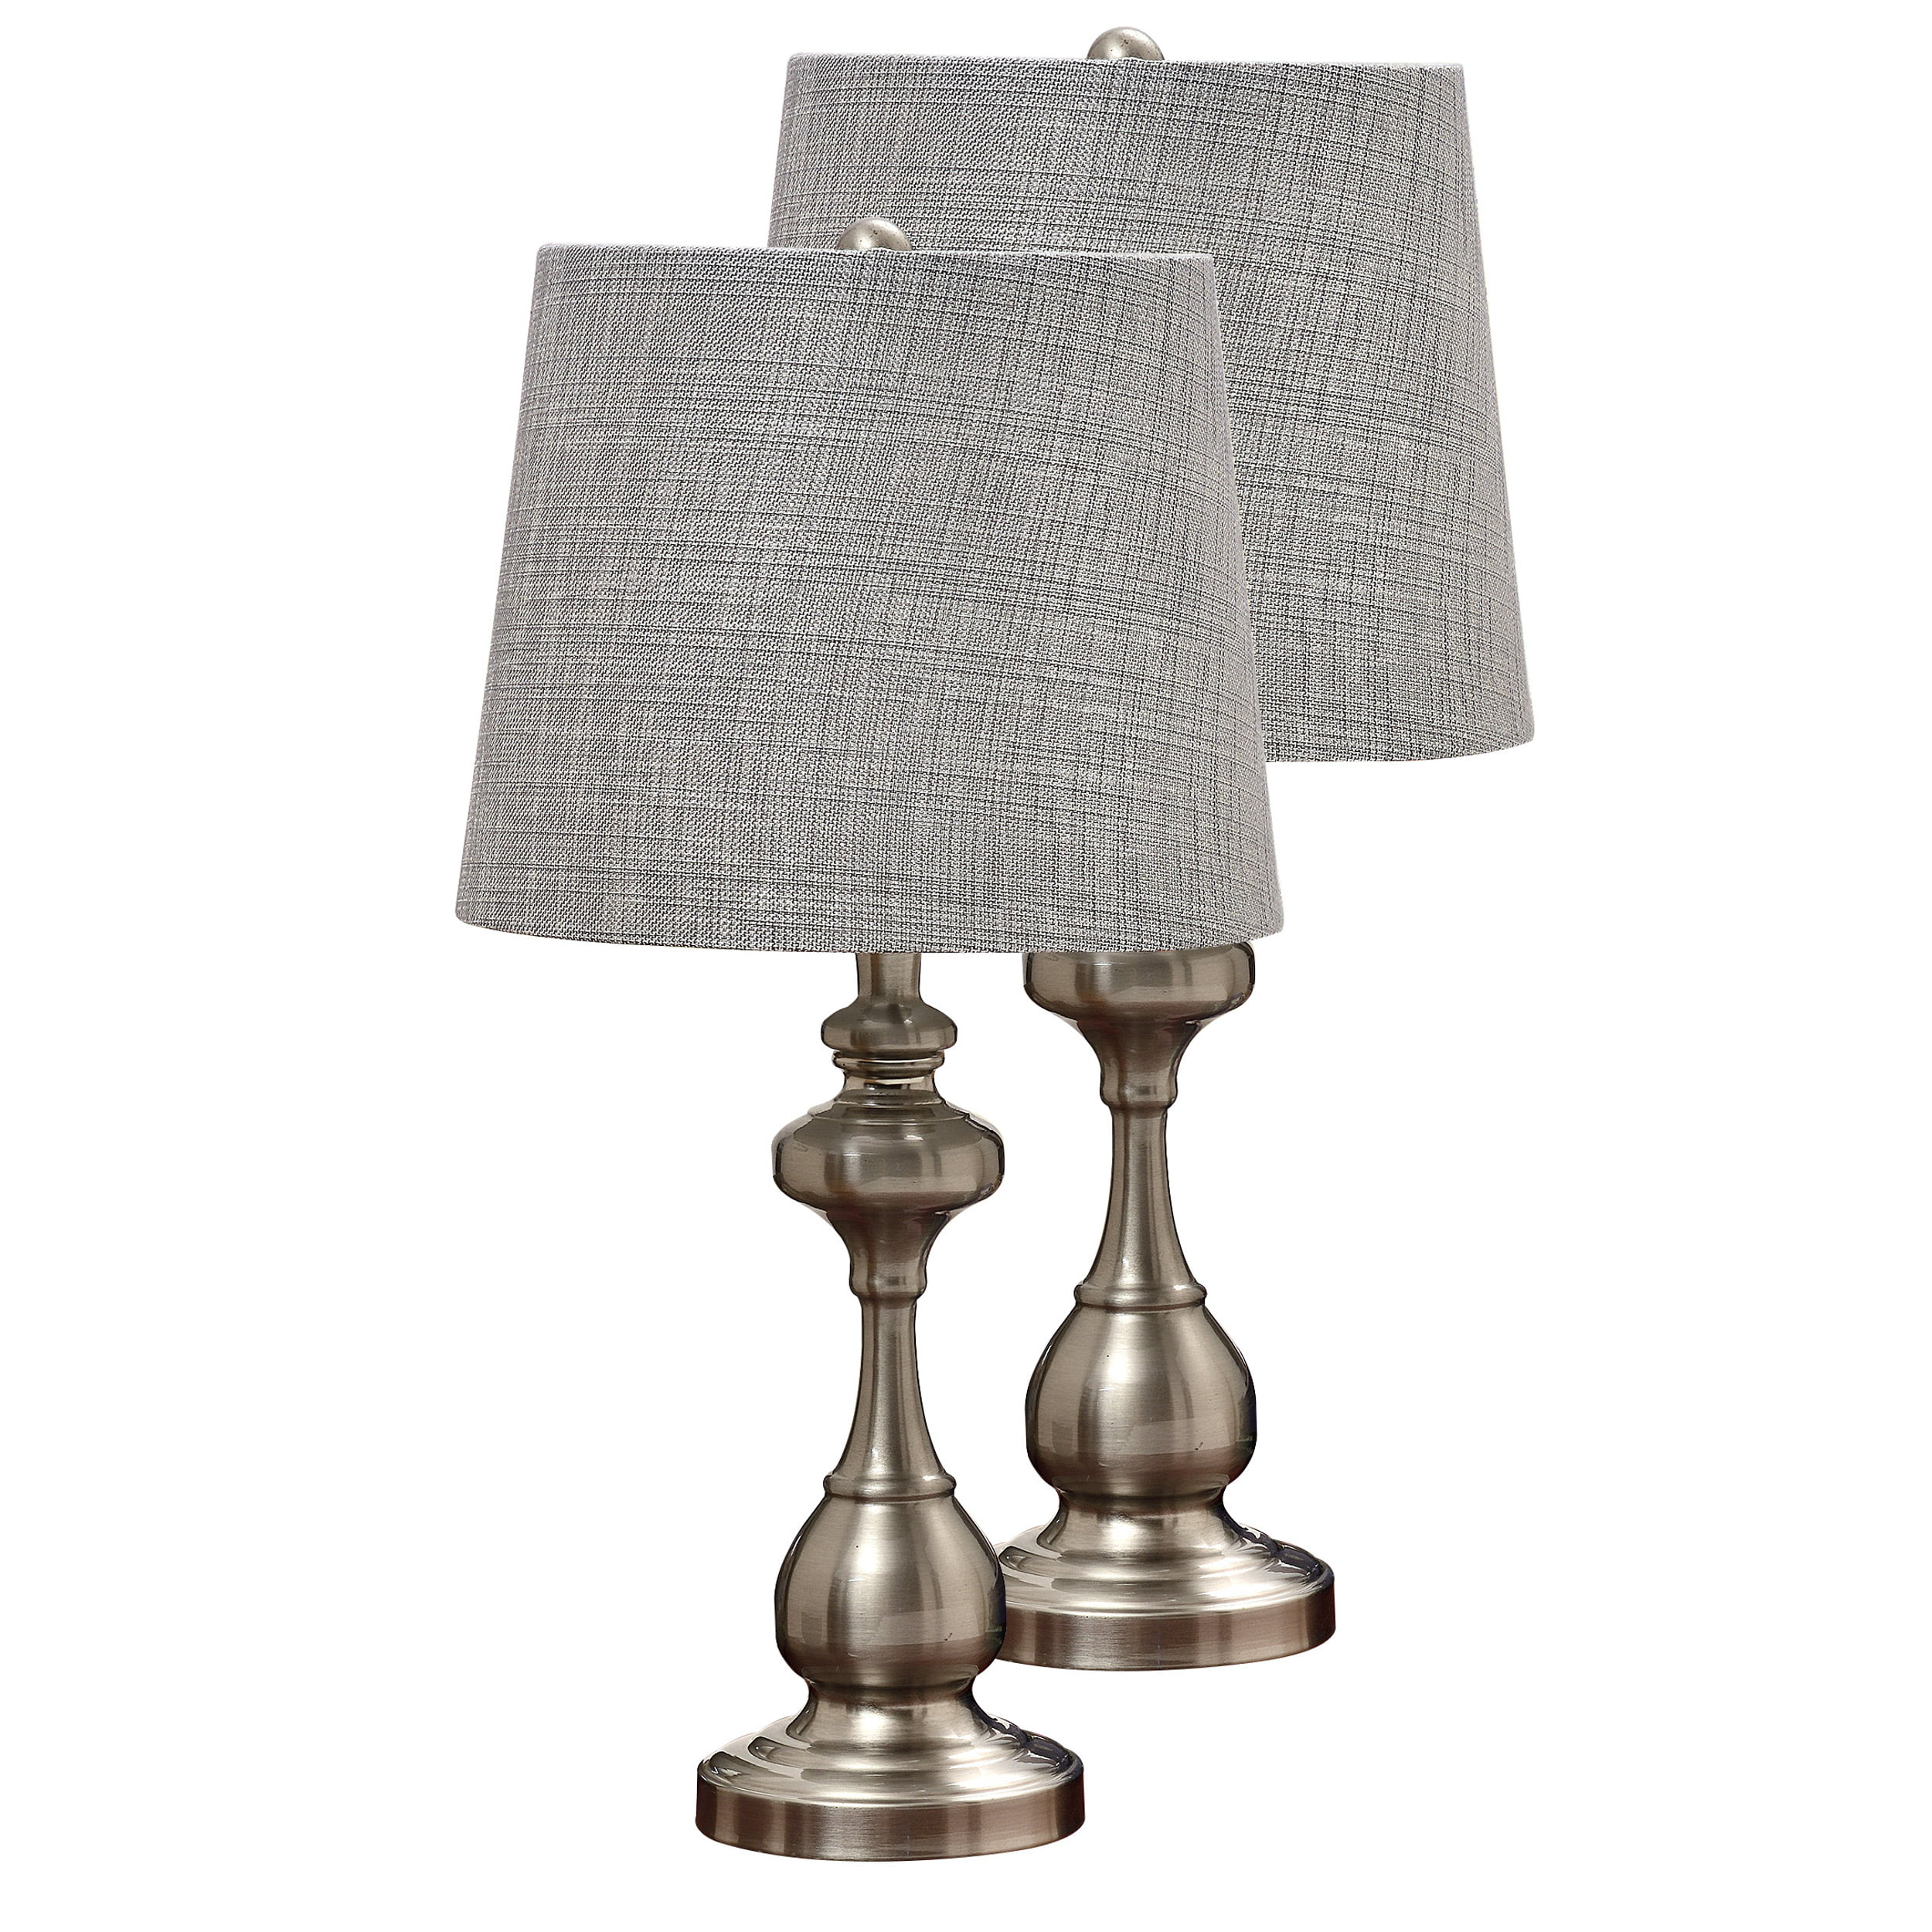 Brushed Nickel With Silver Fabric Shade Contemporary Table Lamps (Set Of 2)